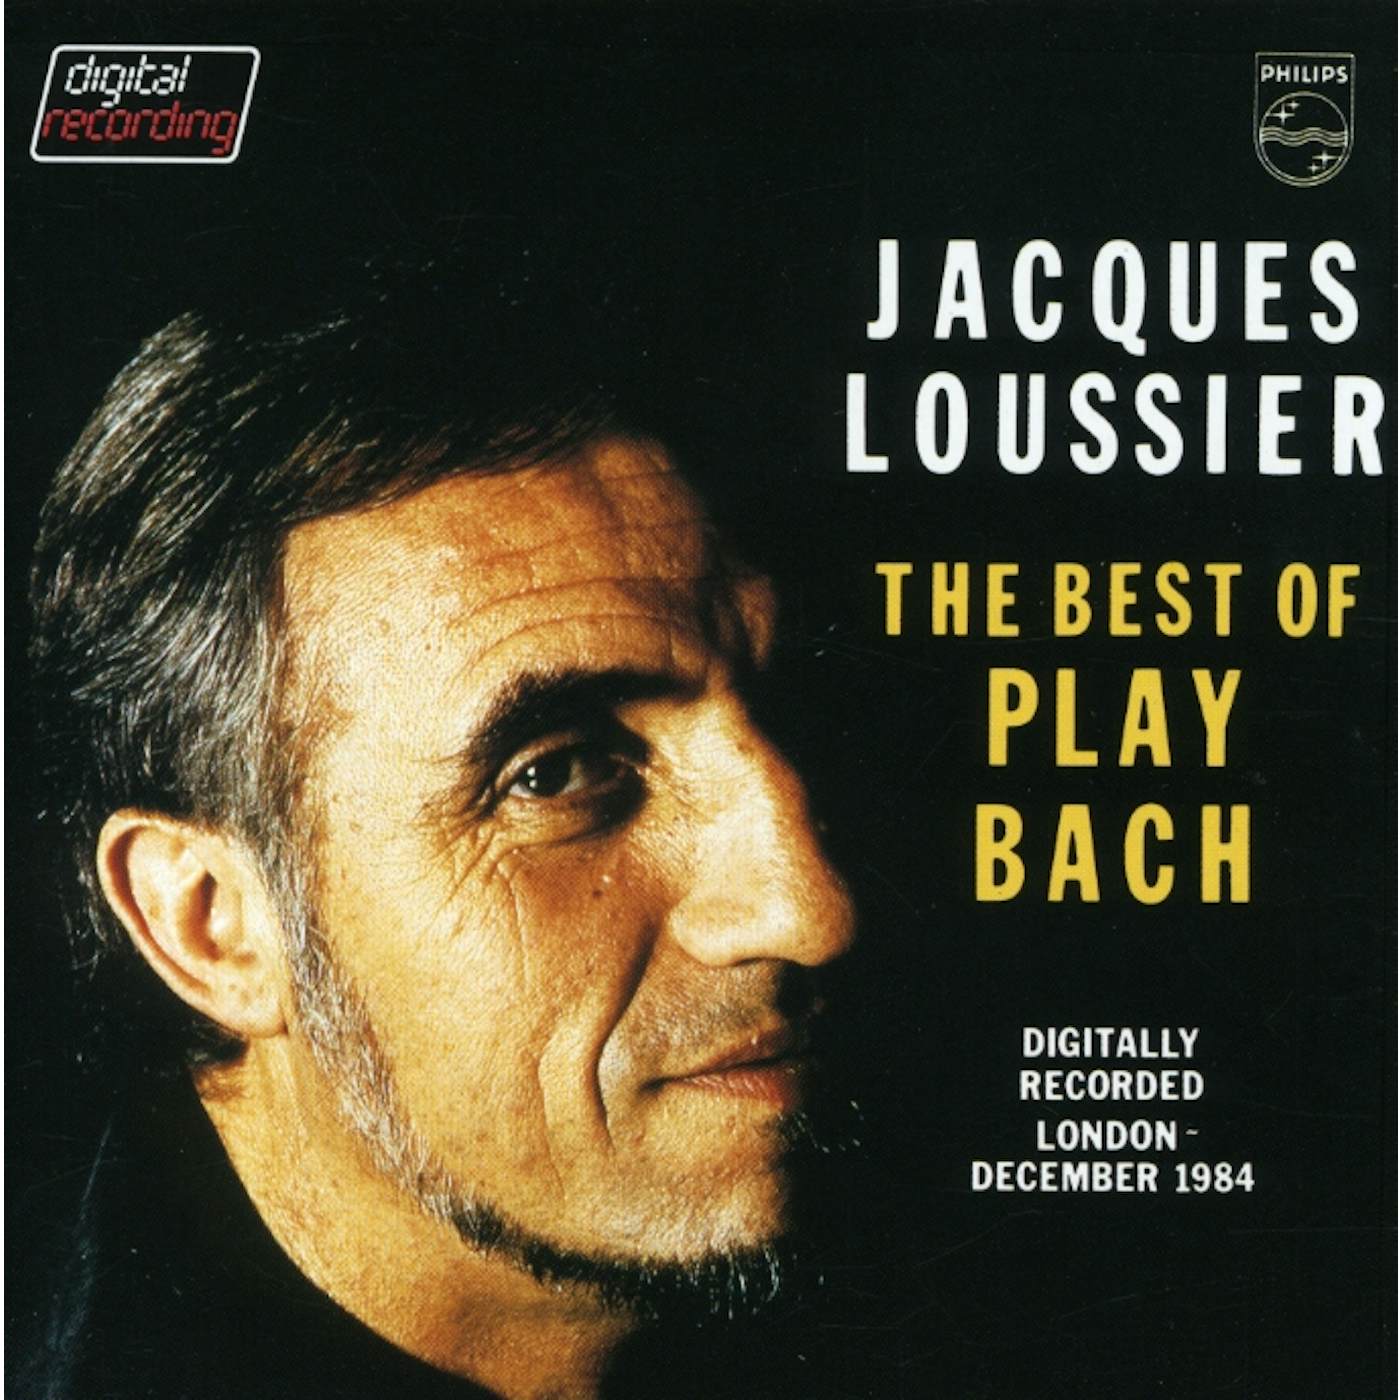 Jacques Loussier BEST OF PLAY BACH CD